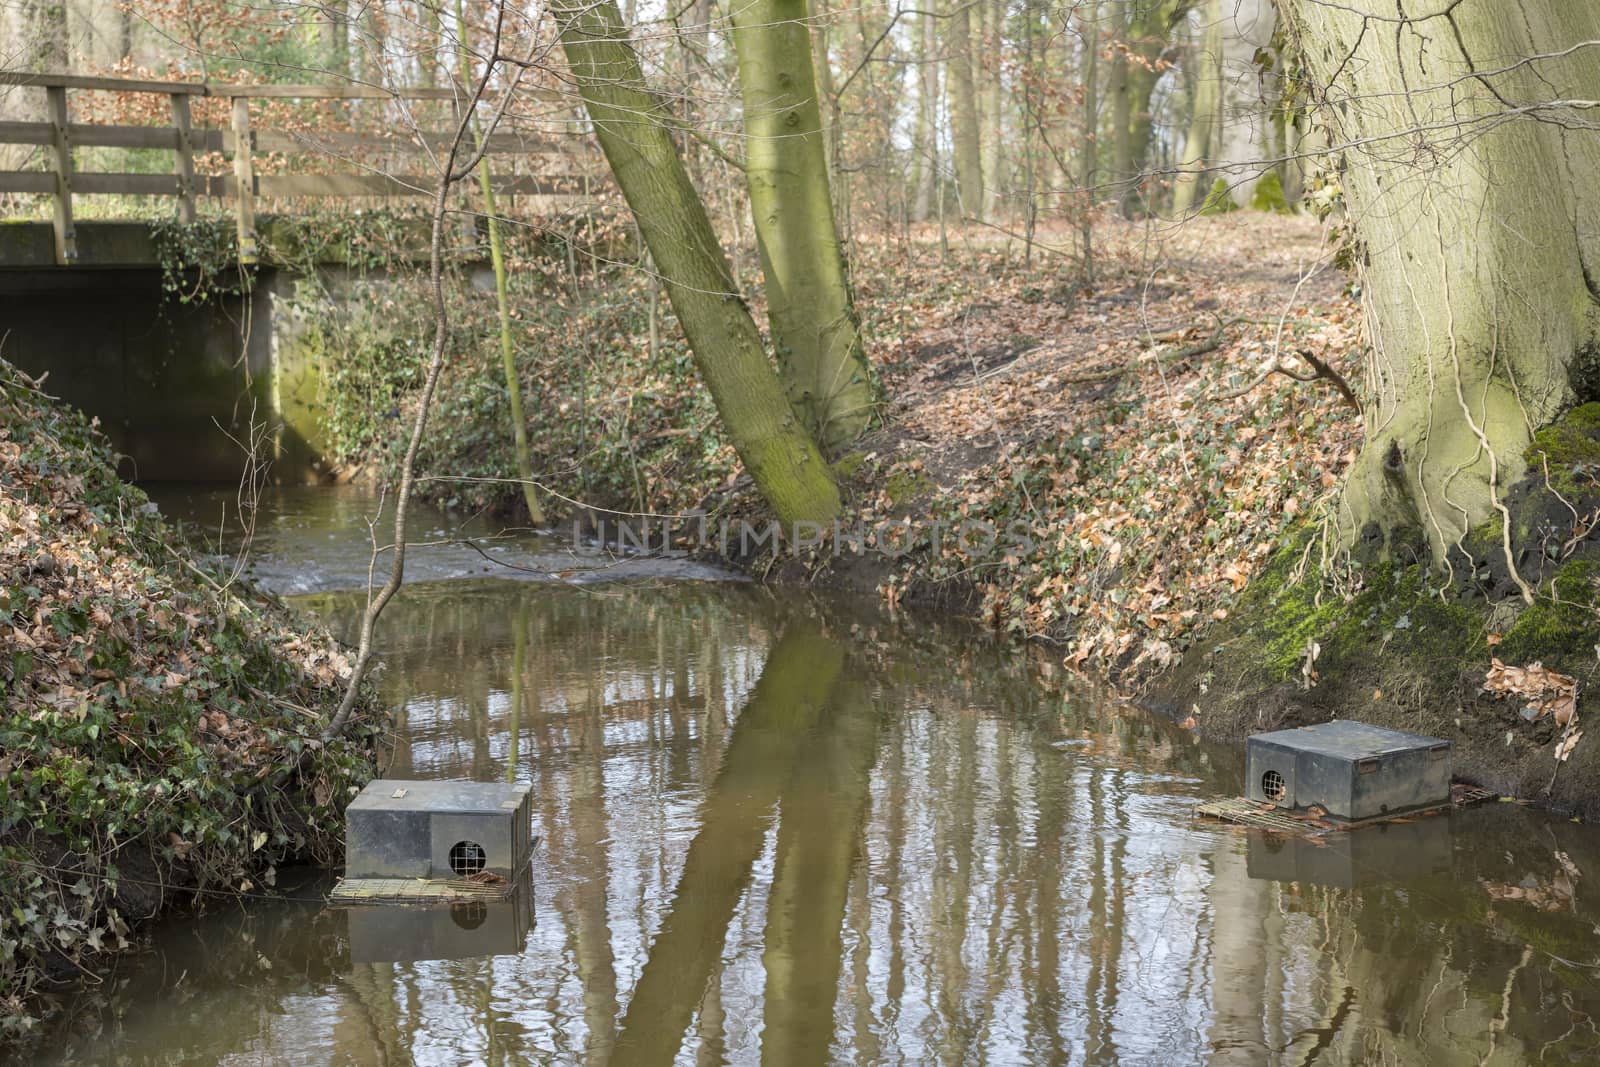 Floating muskrat trap in a stream in the Netherlands
 by Tofotografie